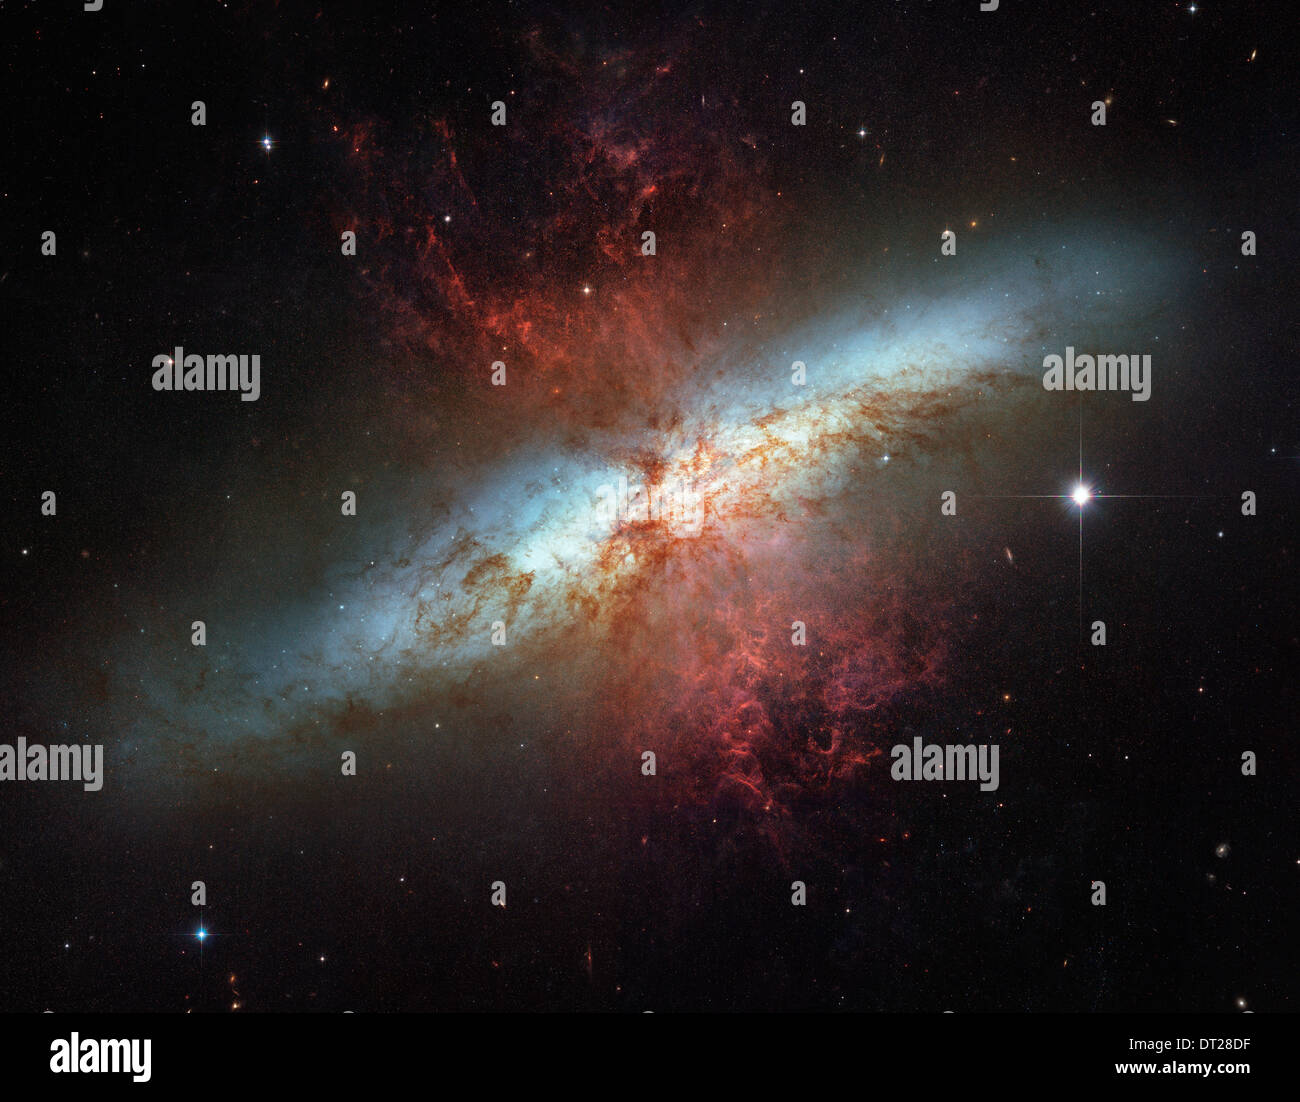 starburst galaxy, Messier 82 (M82). This mosaic image is the sharpest wide-angle view ever obtained of M82. Stock Photo